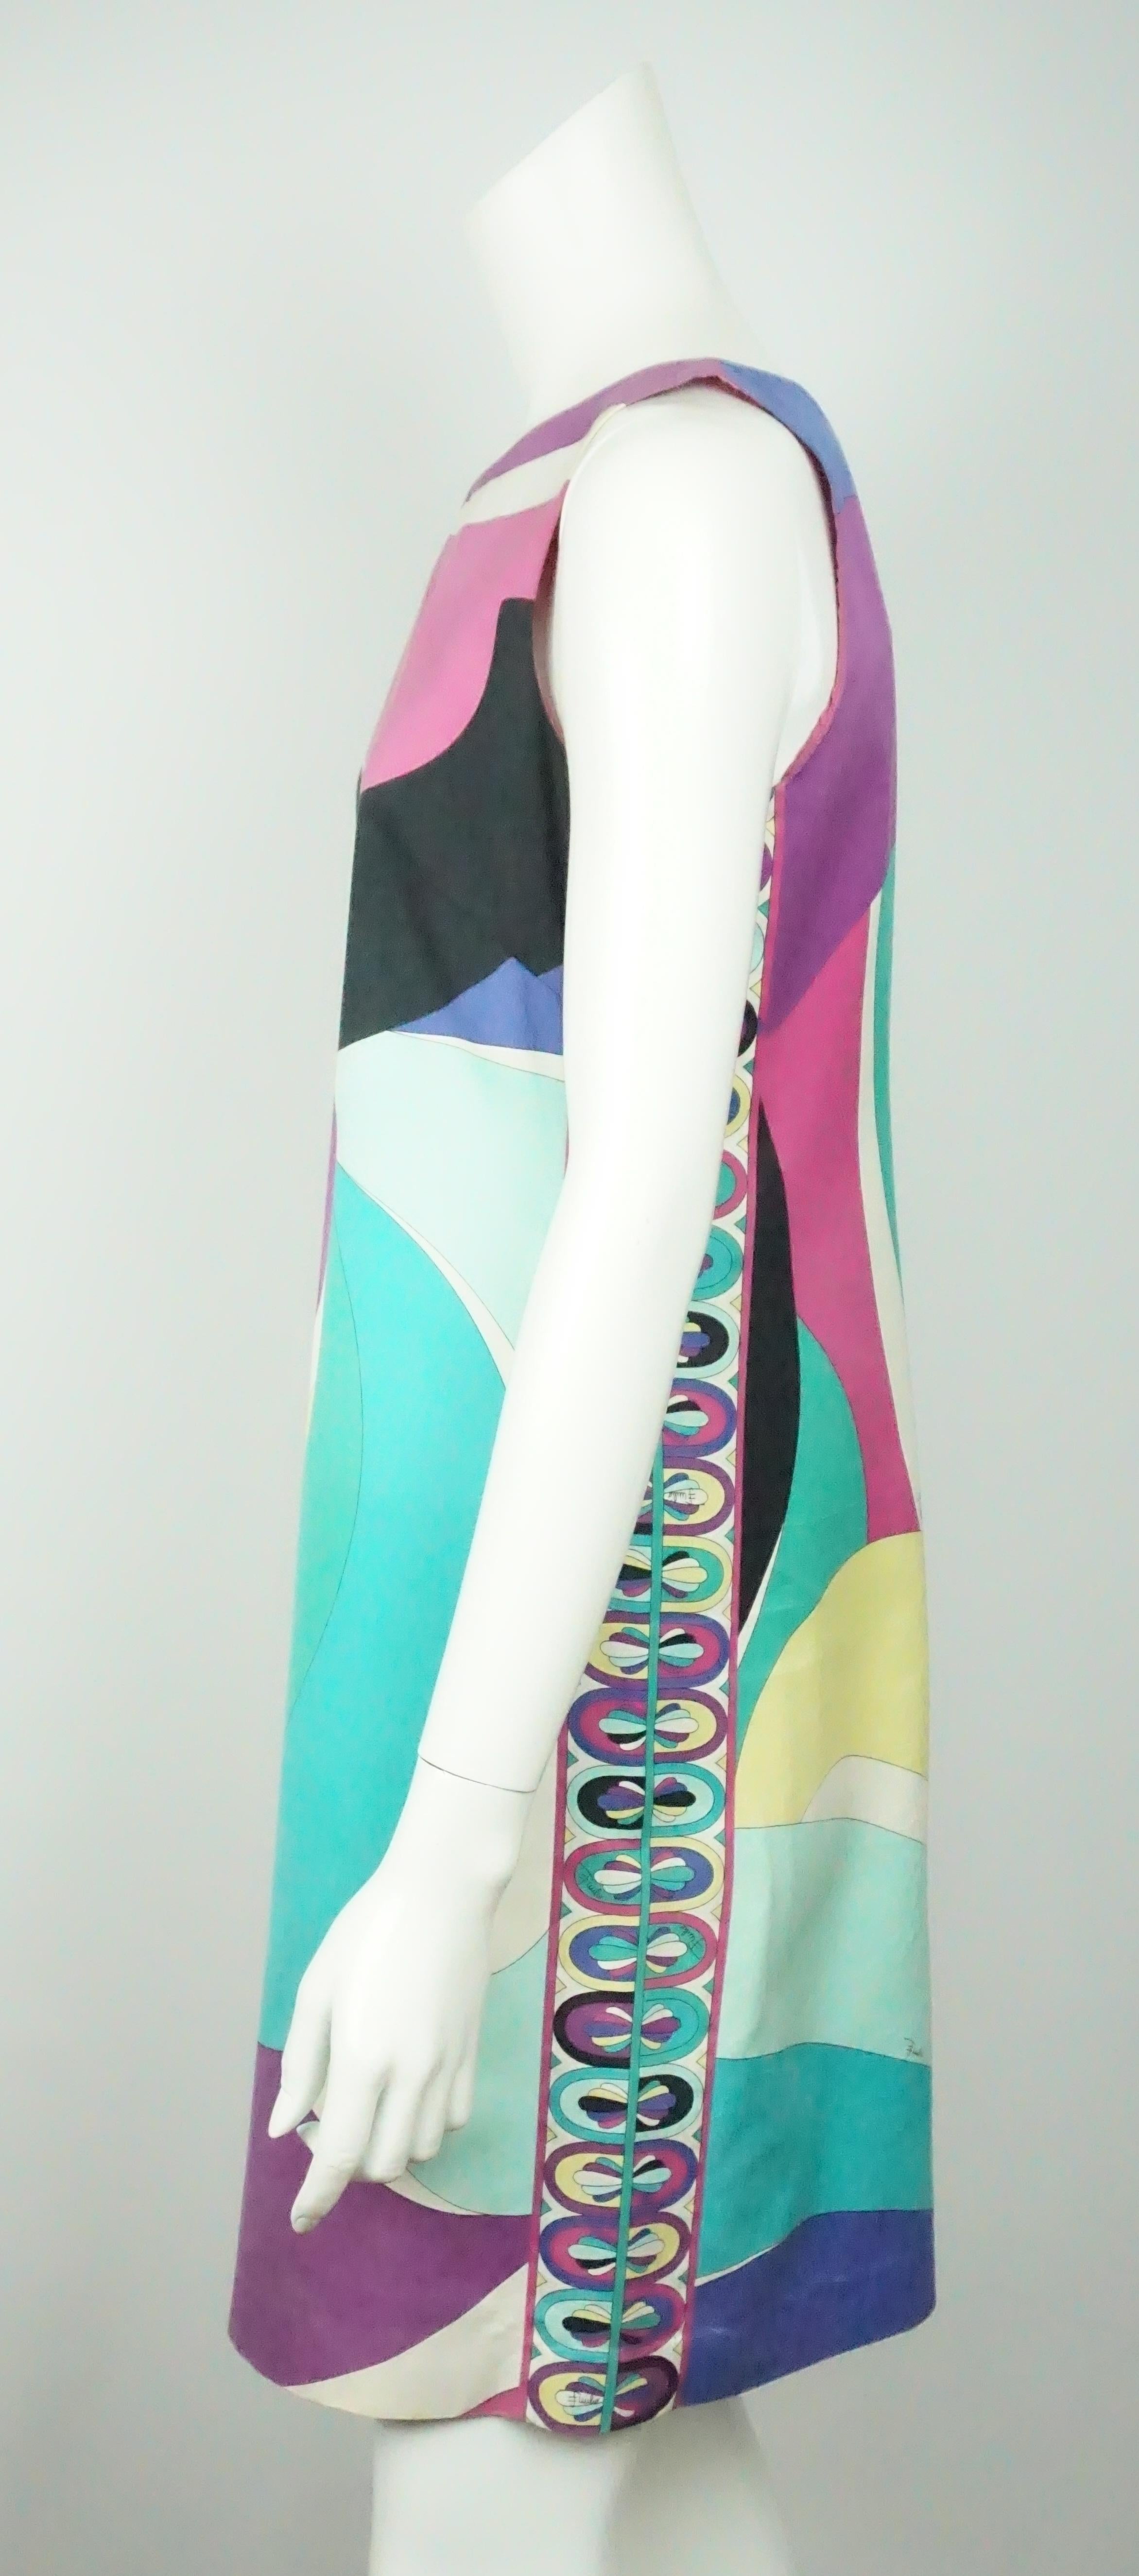 Emilio Pucci Sleeveless Shift Dress - 10  This classic cotton Pucci dress is in good condition. There are beautiful colors on this dress including purples, blues, green, and yellow. The dress is a simple shift dress with the classic Pucci pattern.